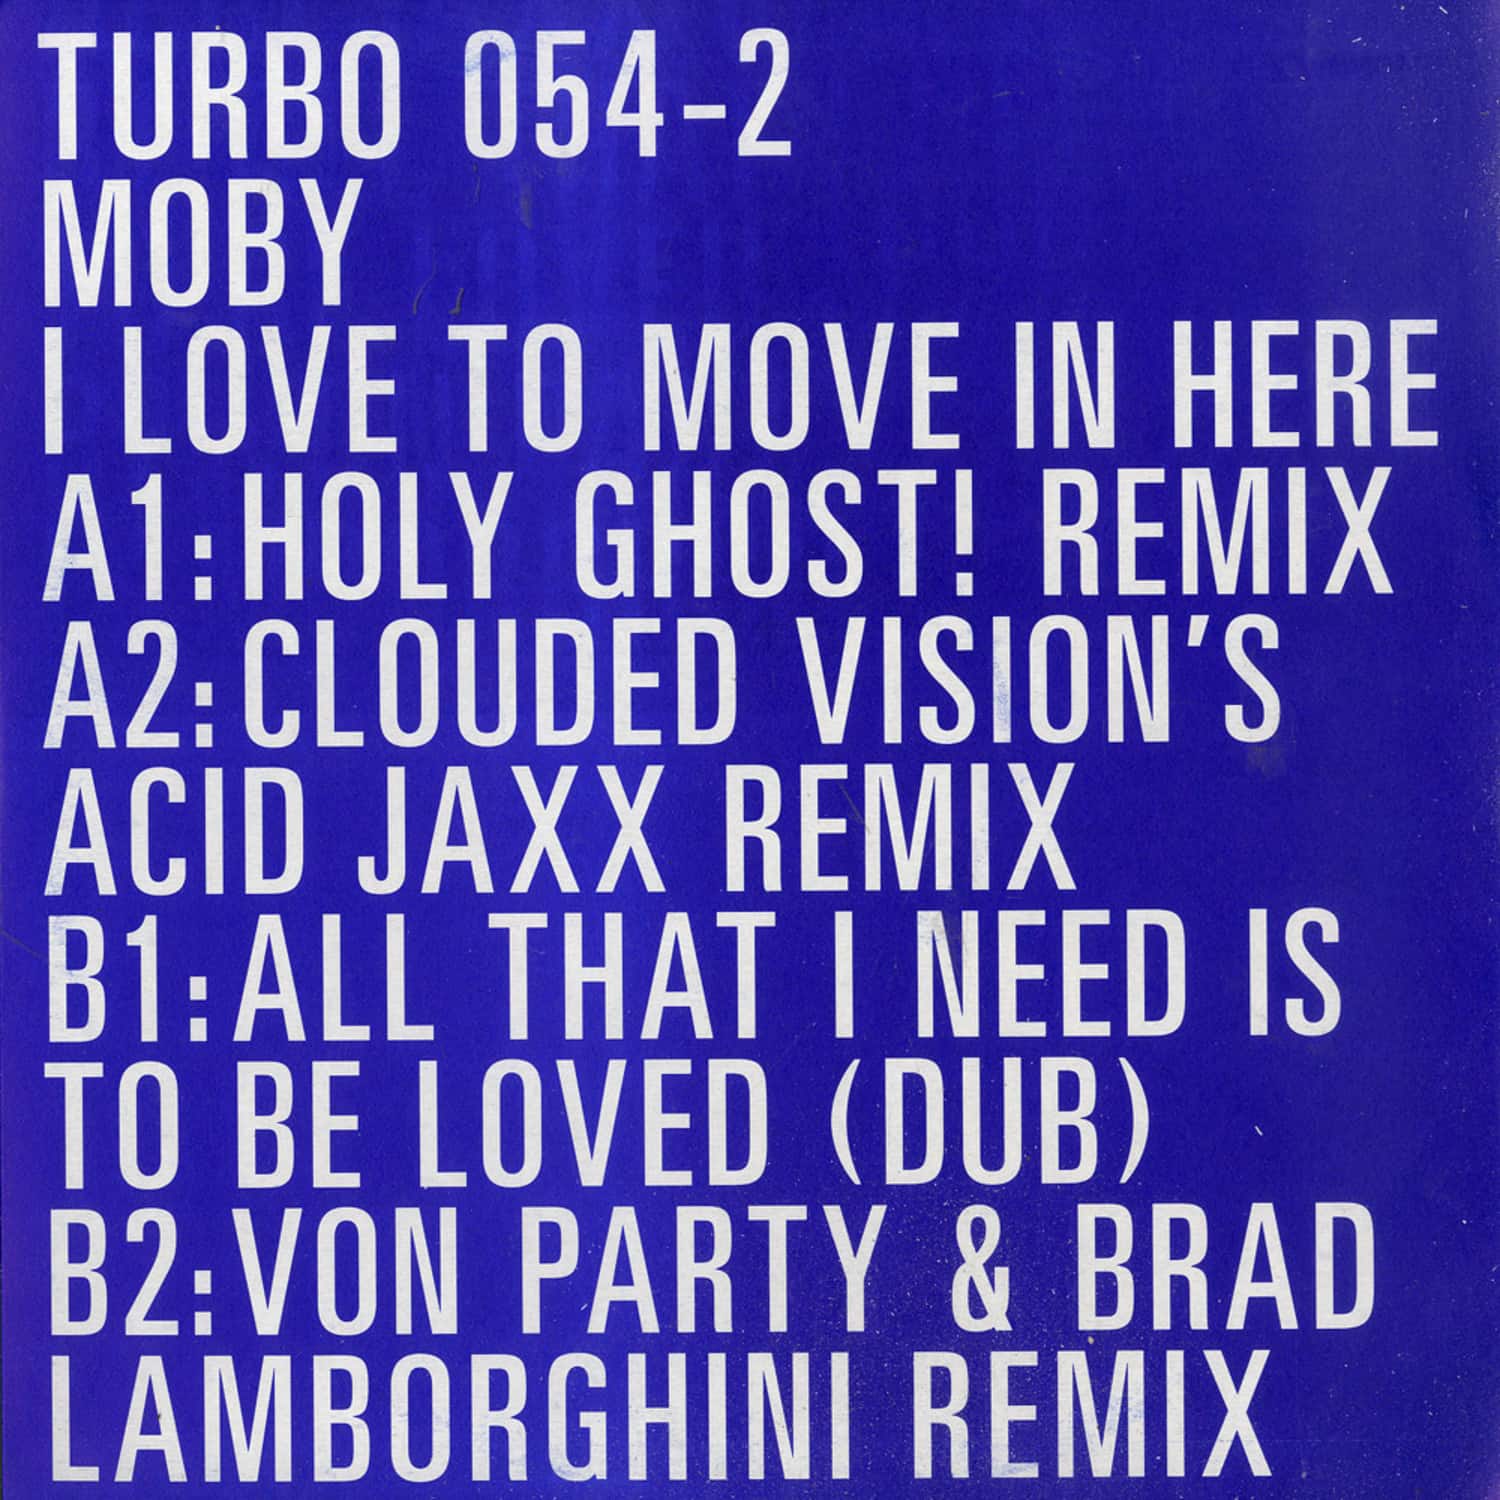 Moby - I LOVE TO MOVE IN HERE PT. 2